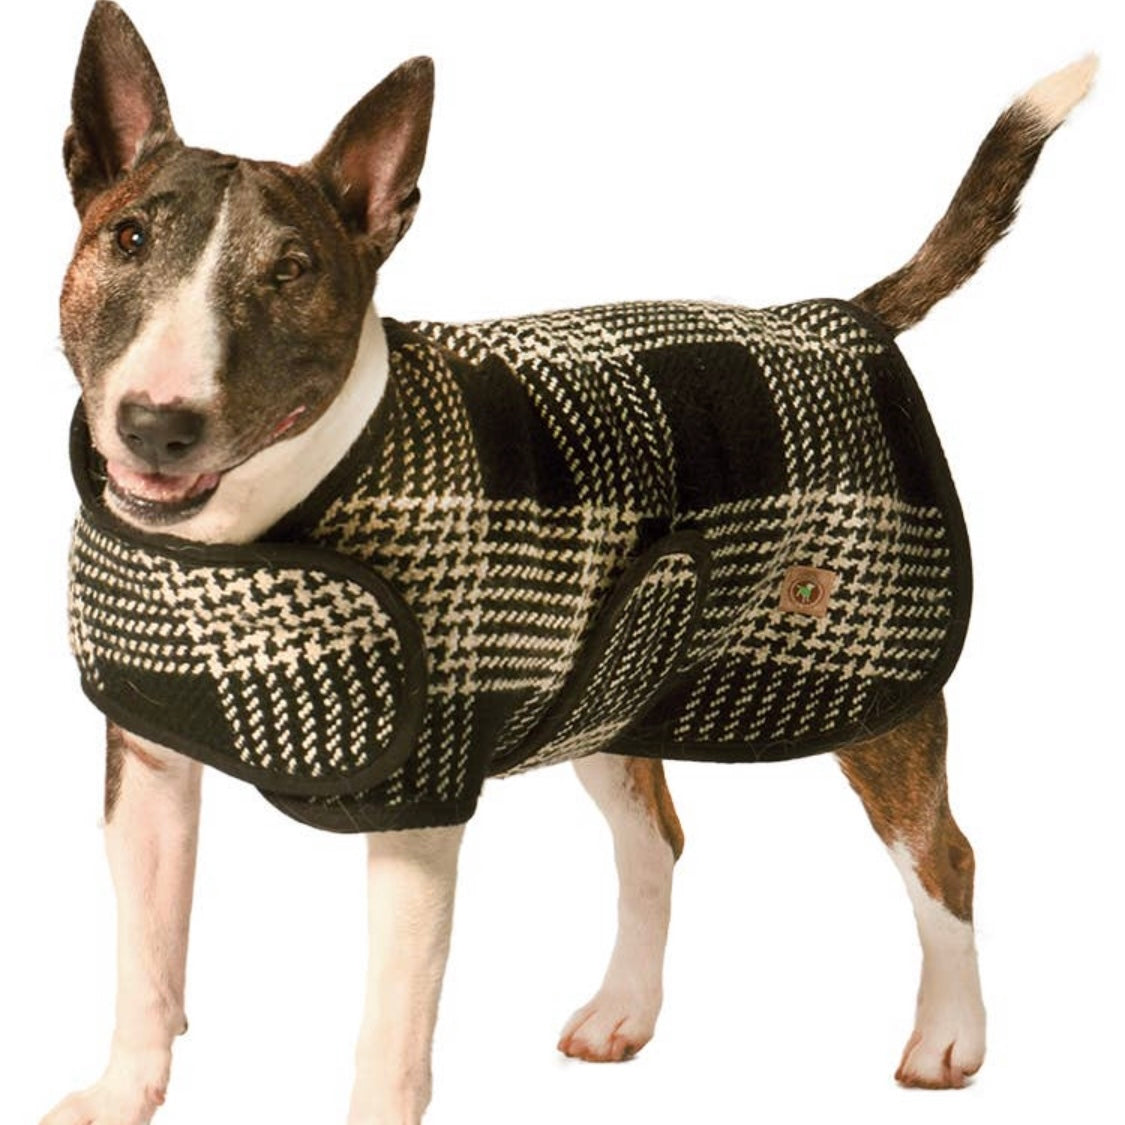 Chilly Dog Sweaters Black/White Plaid Coat